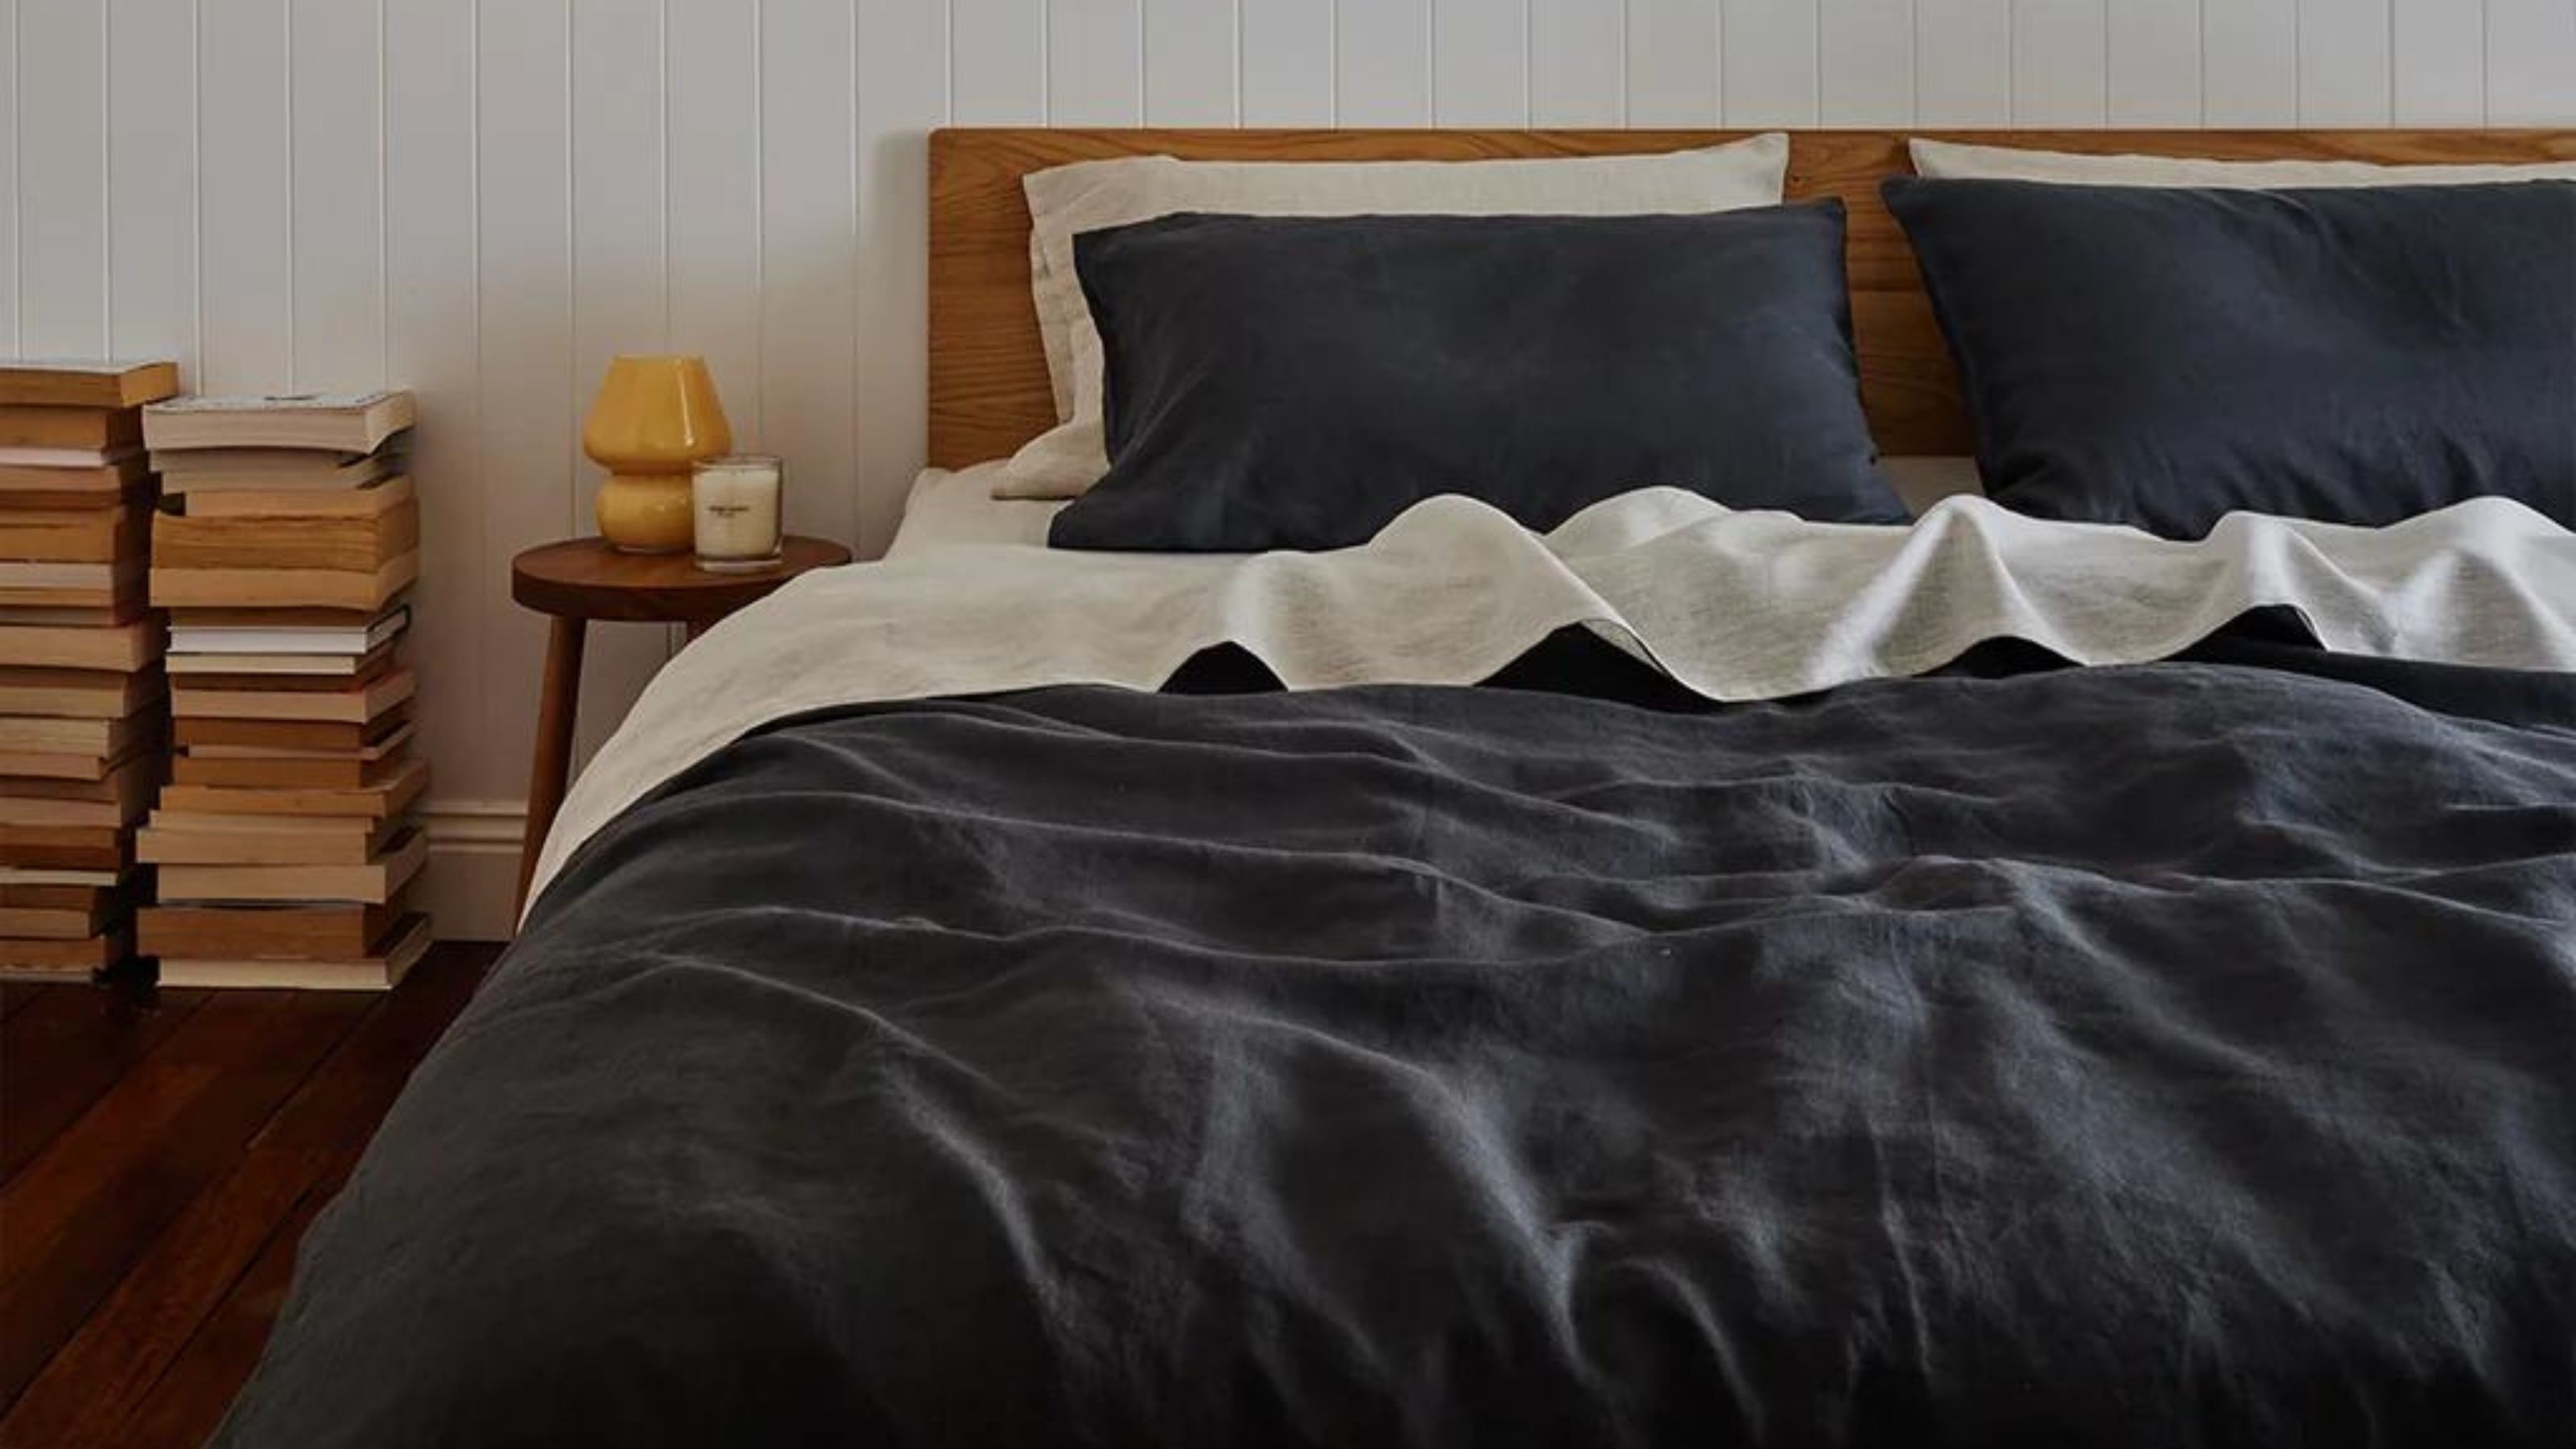 Can you use king size sheets on a full size bed? - Quora